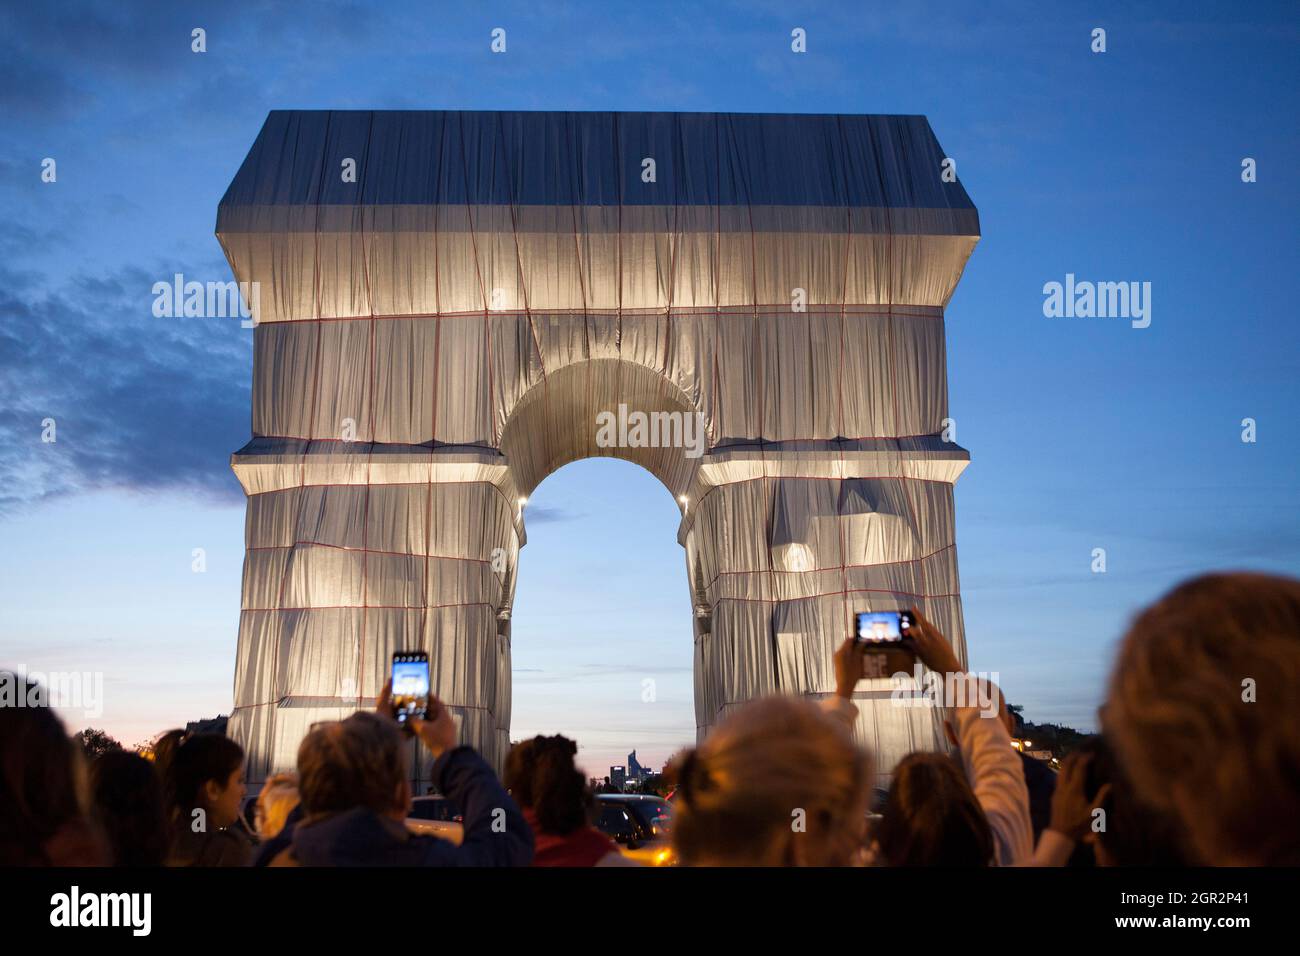 Paris, France, 30 September 2021: The Arc de Triomphe in Paris, wrapped in silver fabric as planned by artists Christo and Jeanne-Claude, and attracting a steady stream of tourists. This weekend the Place Charles de Gaulle surrounding the arch will be closed to traffic, allowing safer sight-seeing than for those who grabbed some shots from the middle of the boulevards radiating from the roundabout. The art installation will be dismantled from Monday 4th October to allow for Armistice Day celebrations to take place as normal. Anna Watson/Alamy Live News Stock Photo